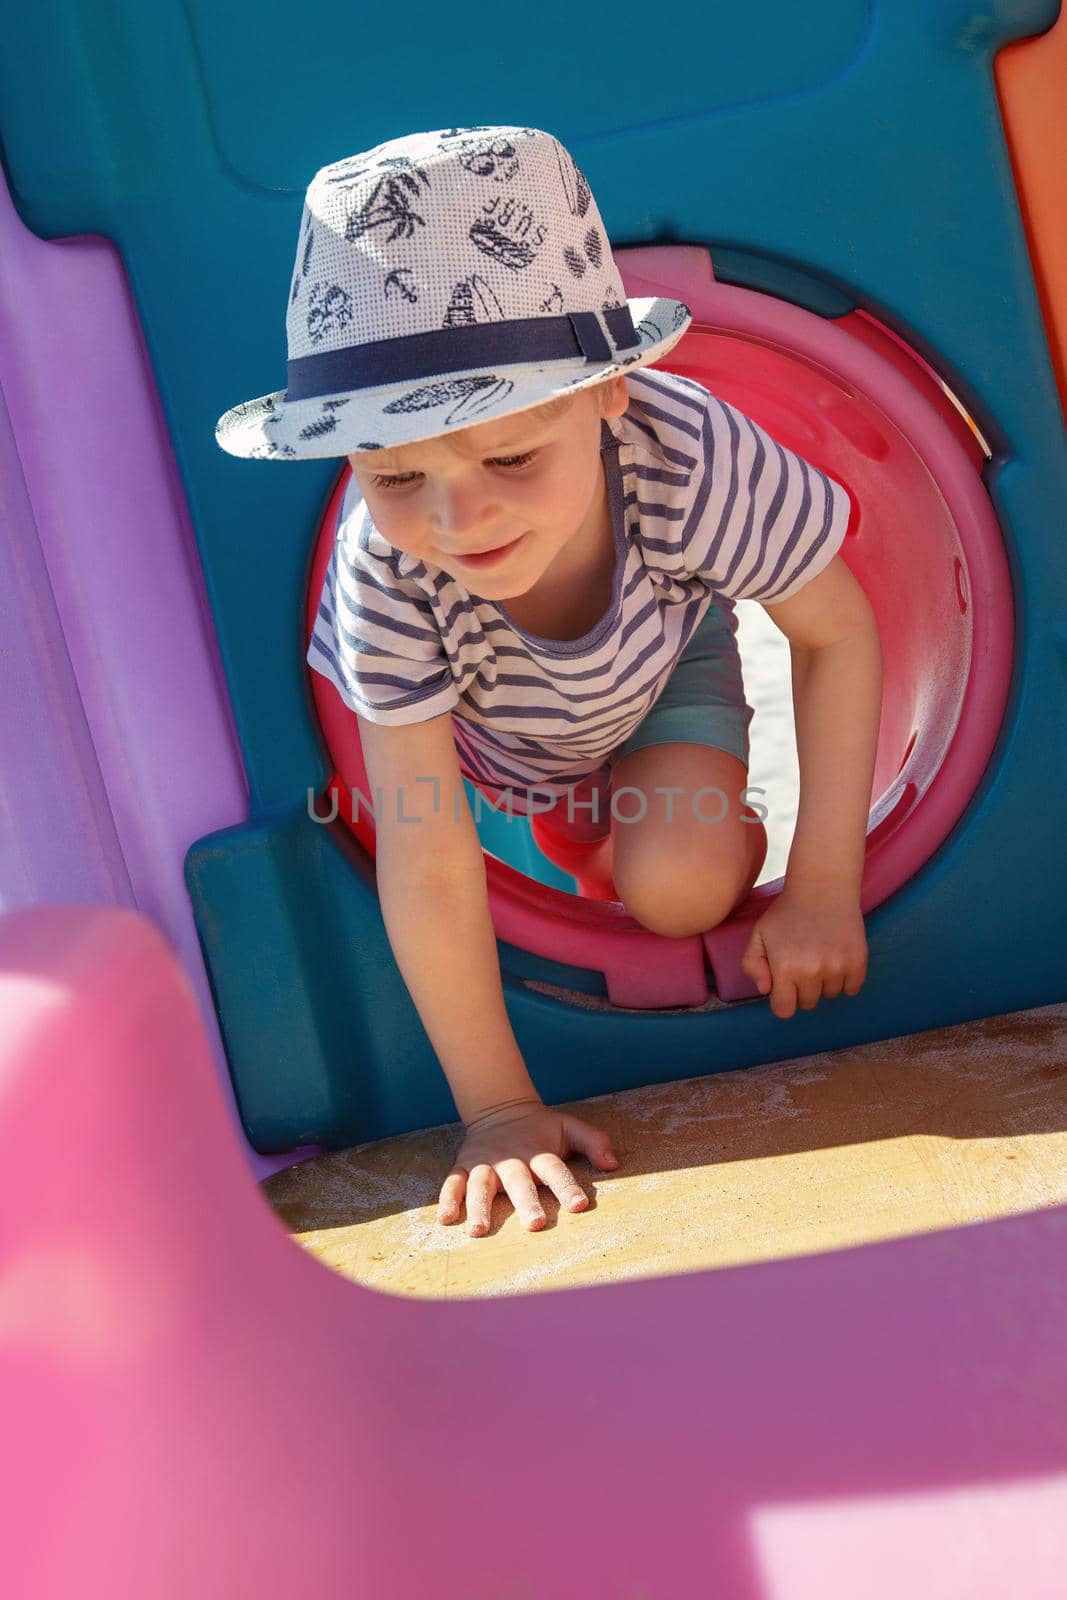 The little boy plays in a colorful, plastic playroom, he performs crawl in tunnel exercises